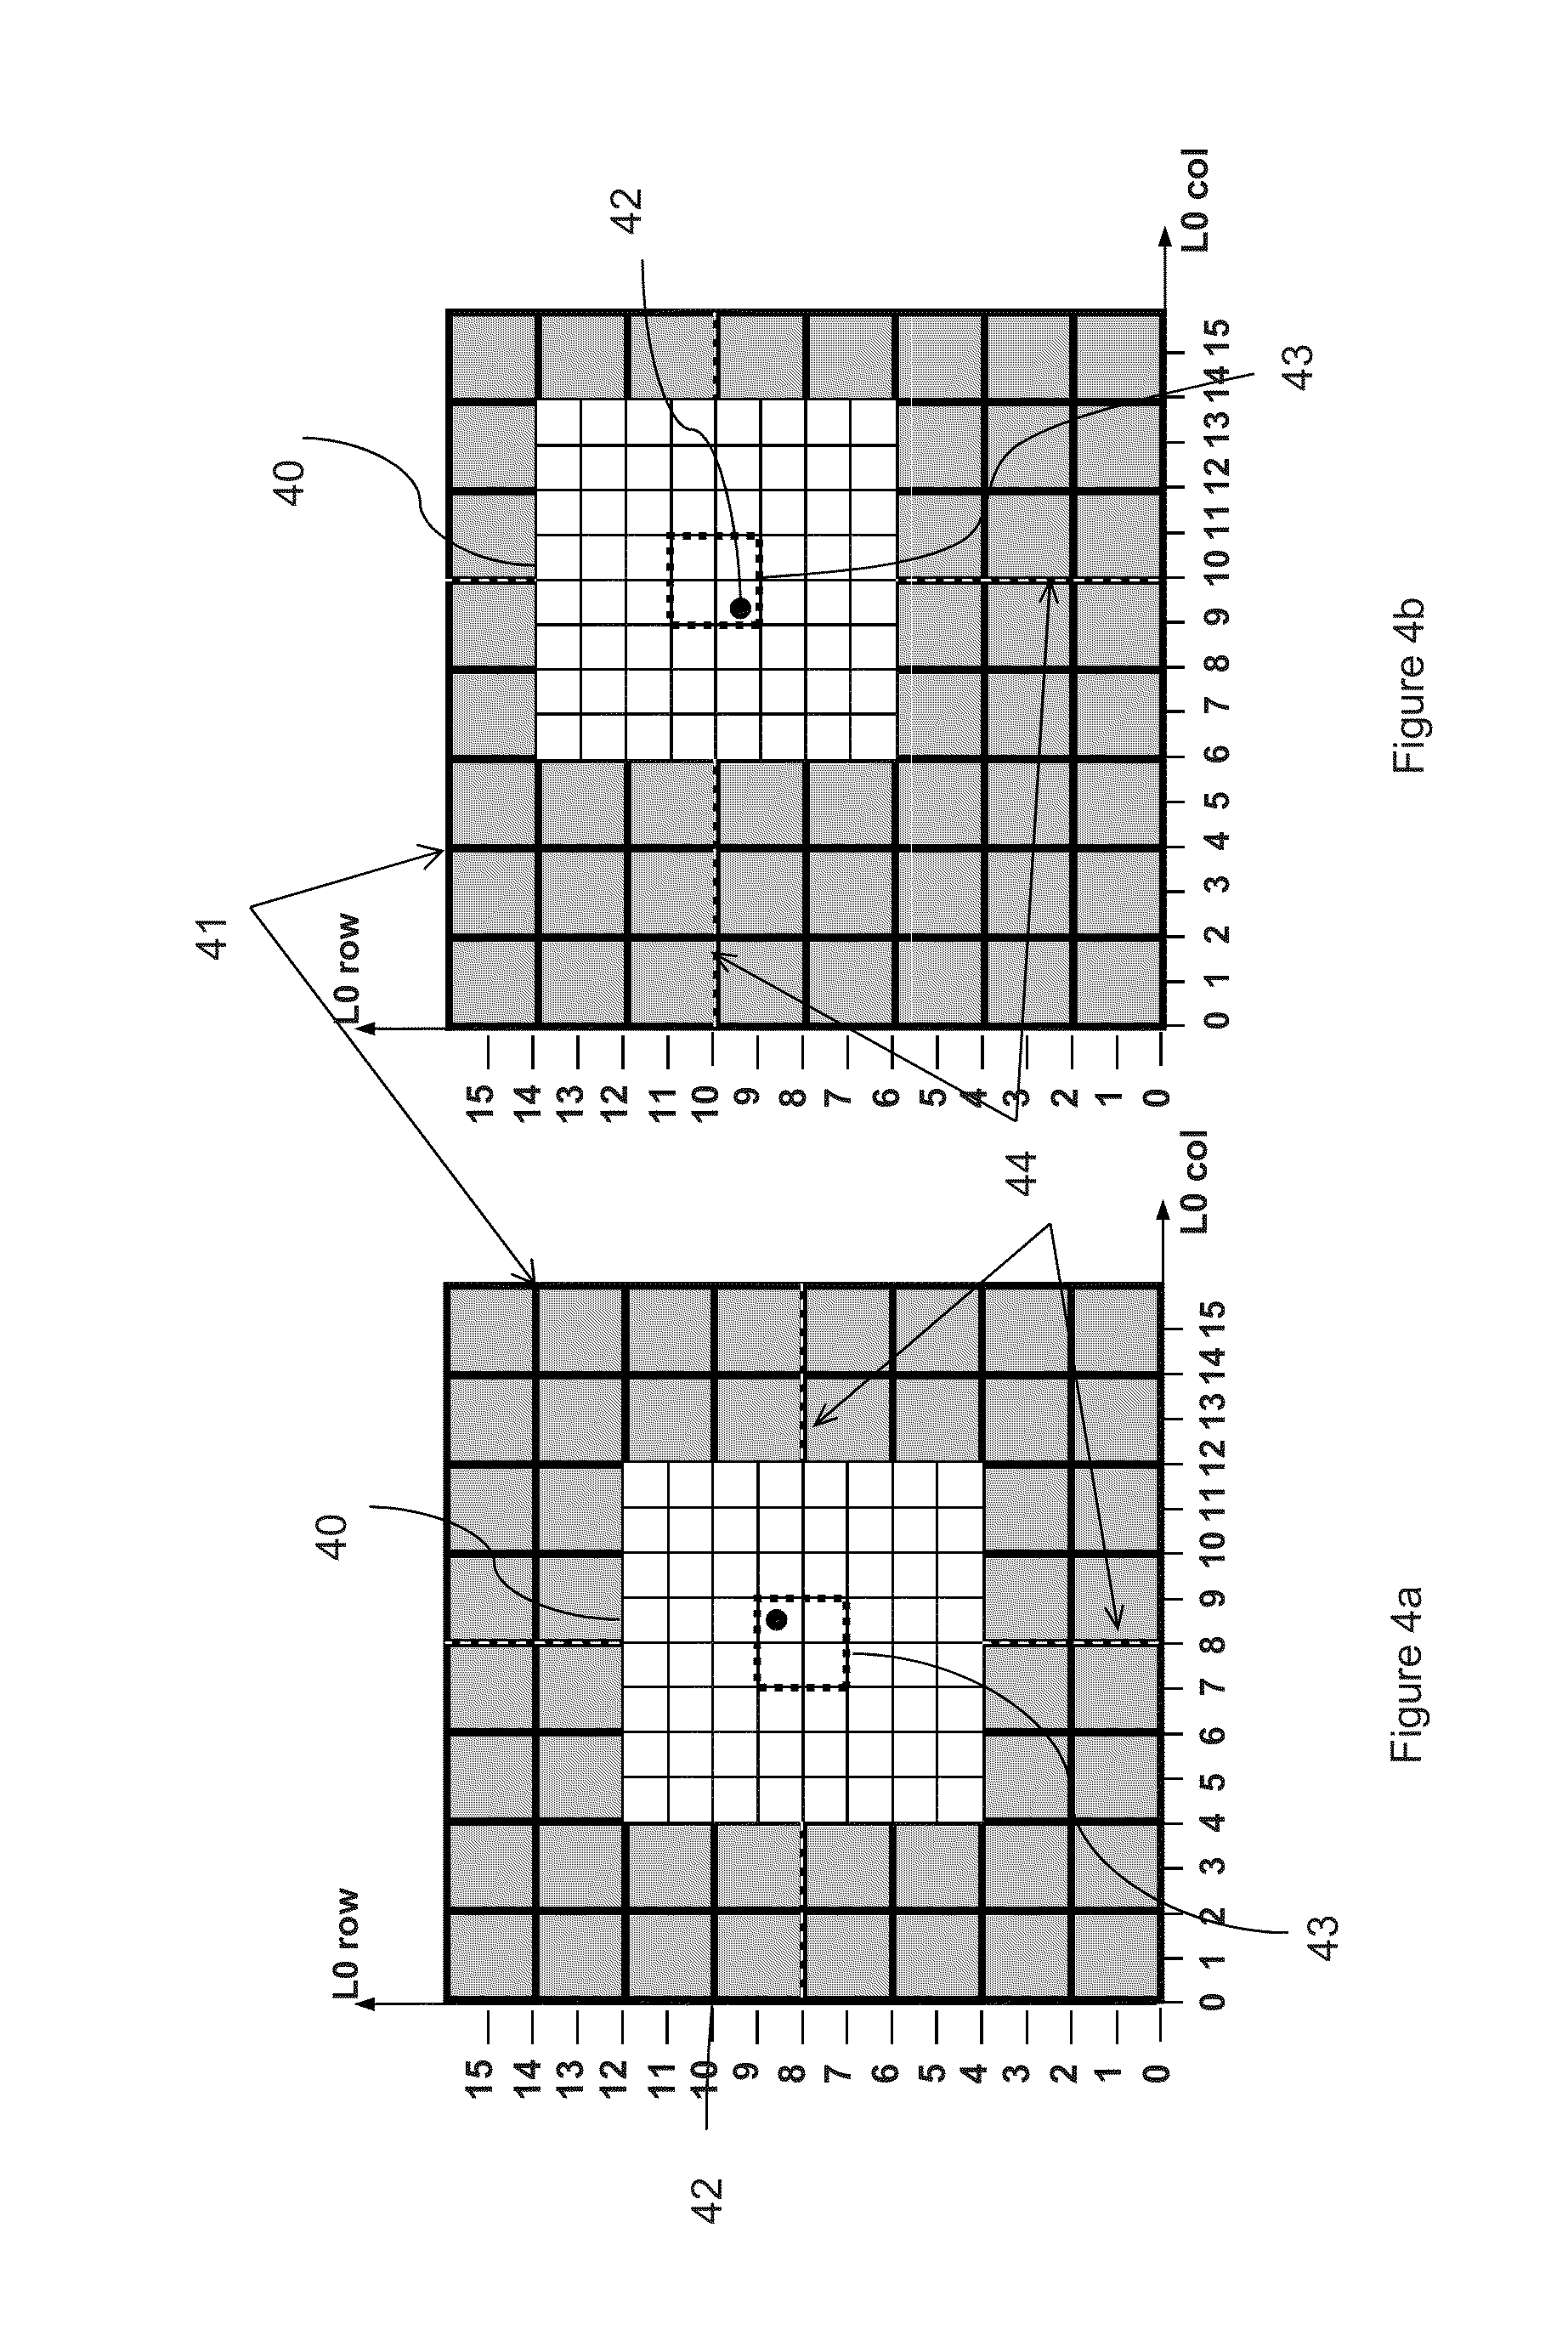 Method of rendering a terrain stored in a massive database